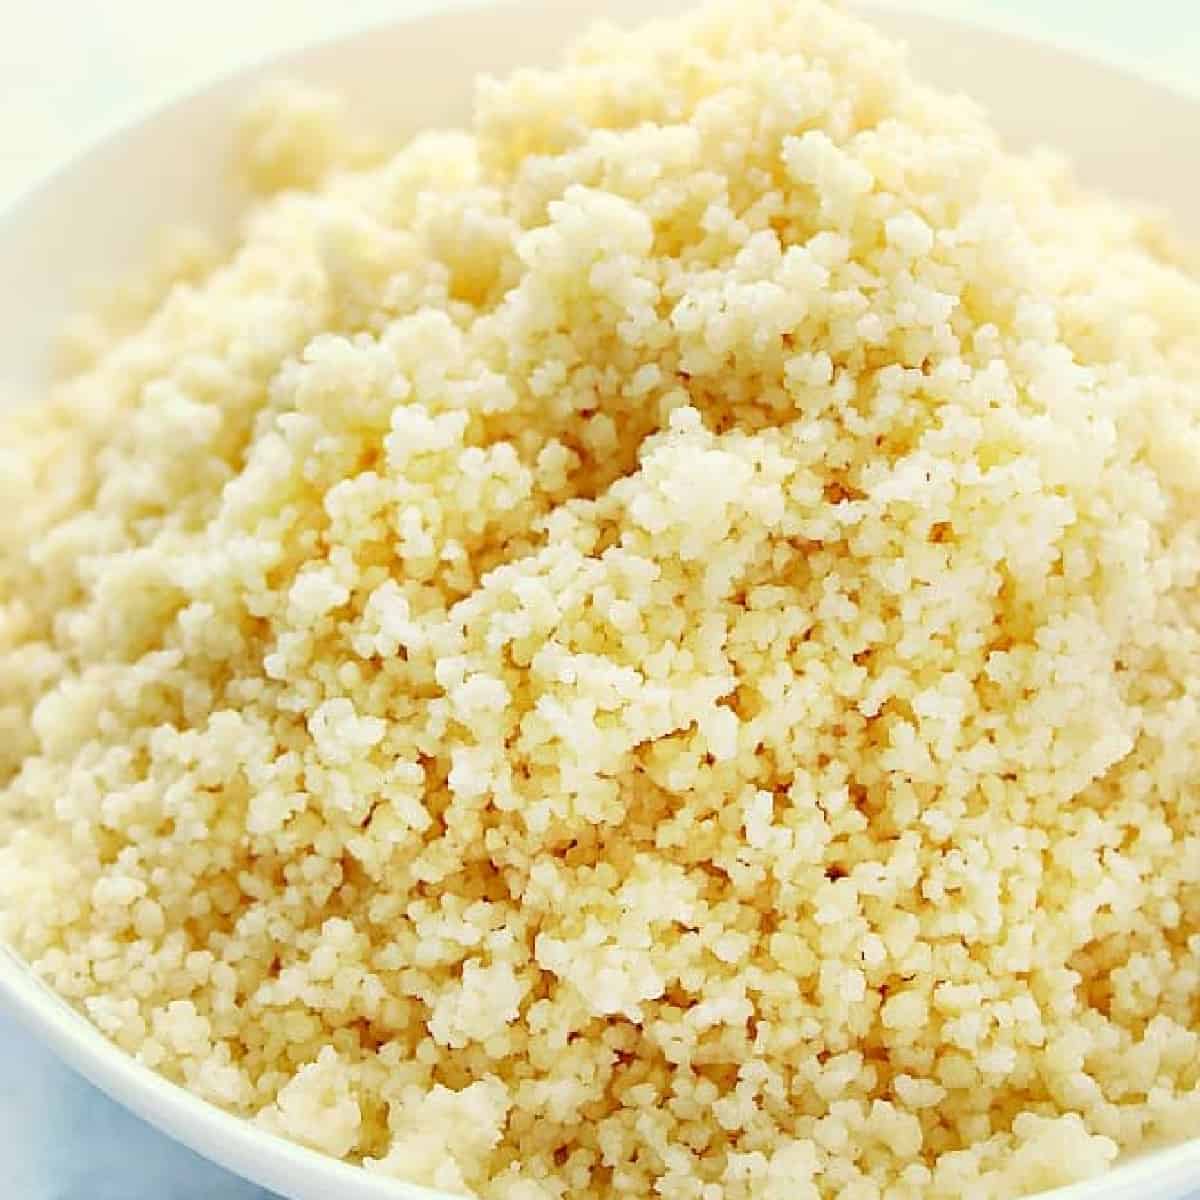 Cooked couscous in a white bowl.